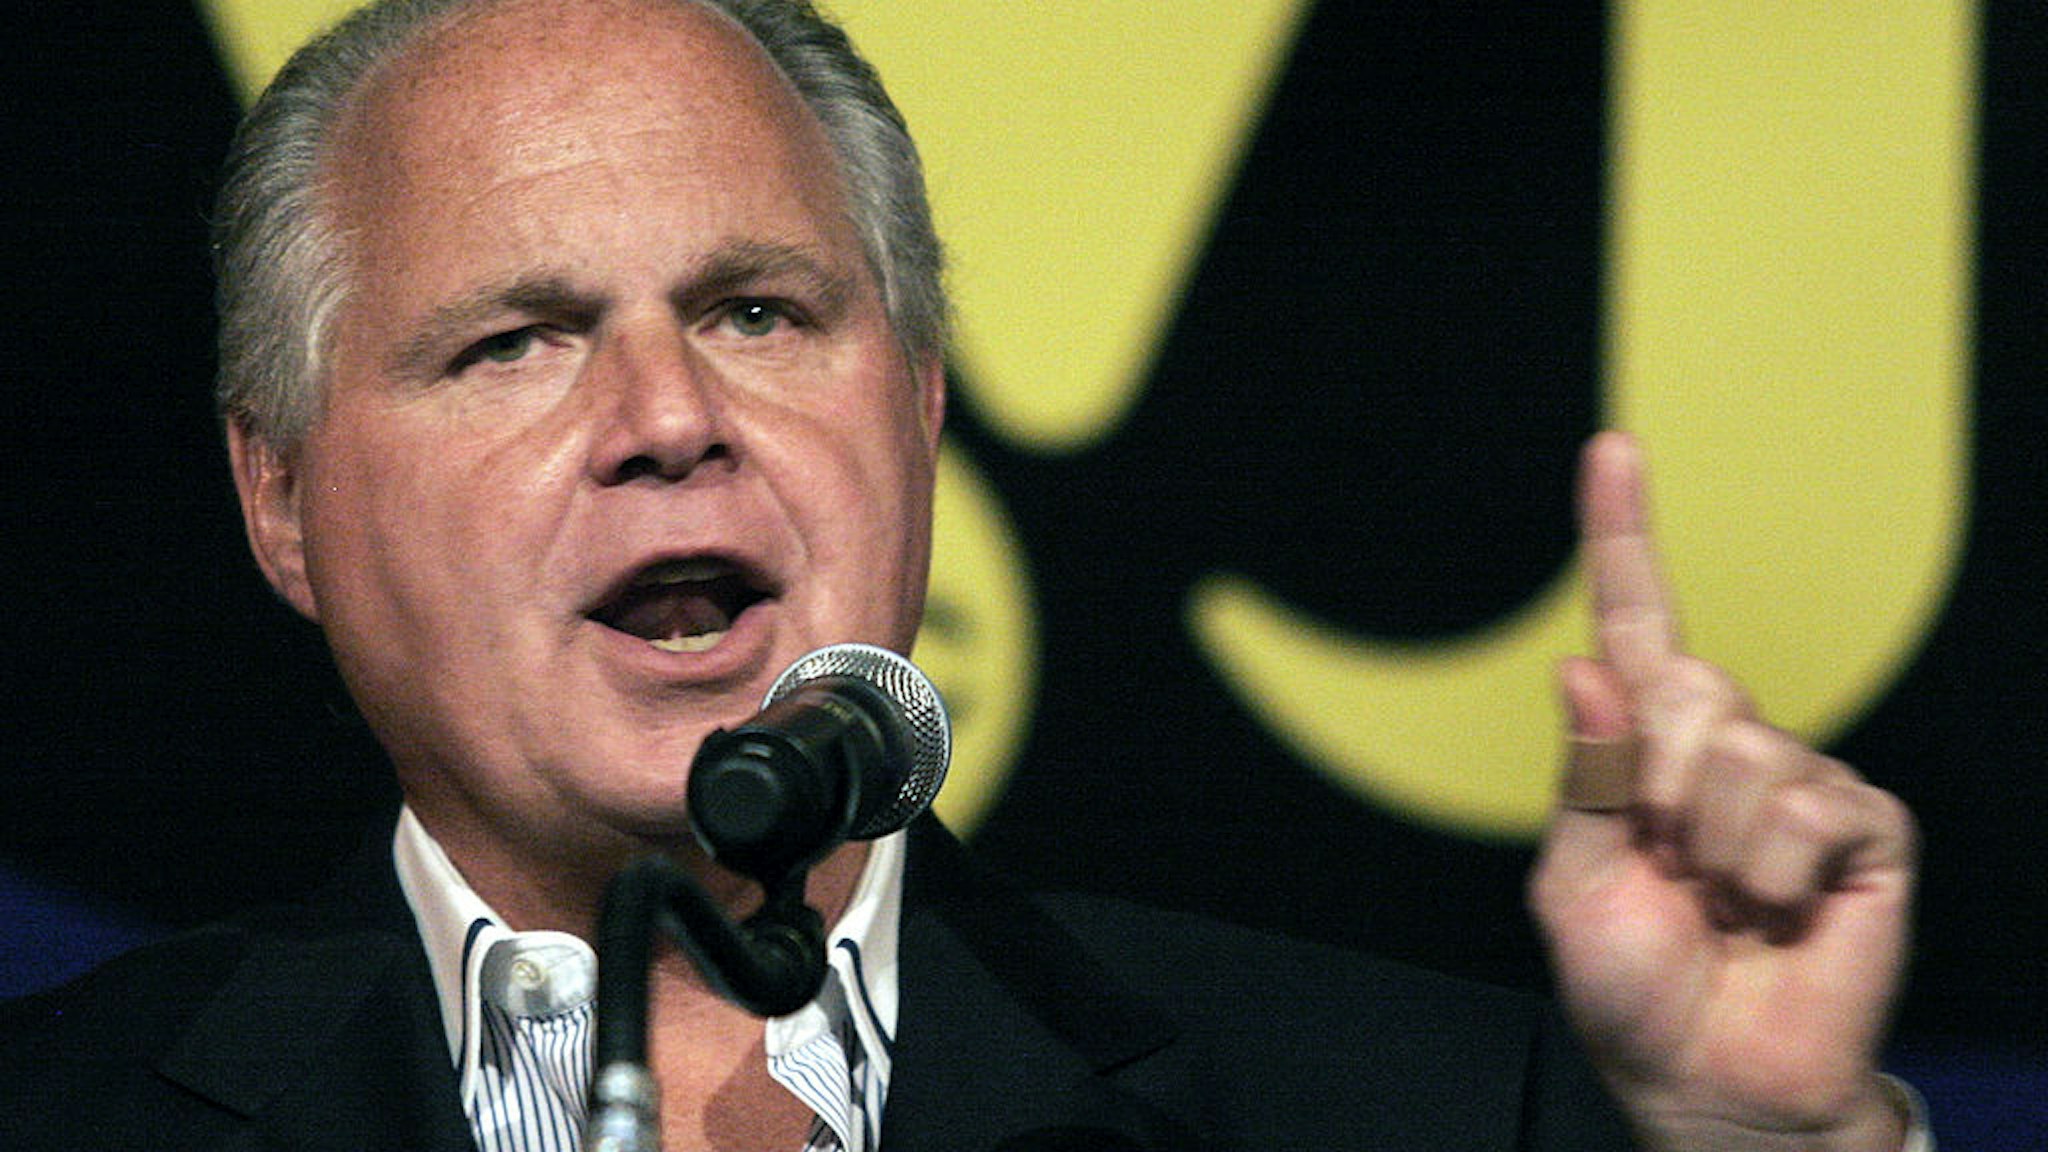 NOVI, MI - MAY 3: Radio talk show host and conservative commentator Rush Limbaugh speaks at "An Evenining With Rush Limbaugh" event May 3, 2007 in Novi, Michigan. The event was sponsored by WJR radio station as part of their 85th birthday celebration festivities. (Photo by Bill Pugliano/Getty Images)